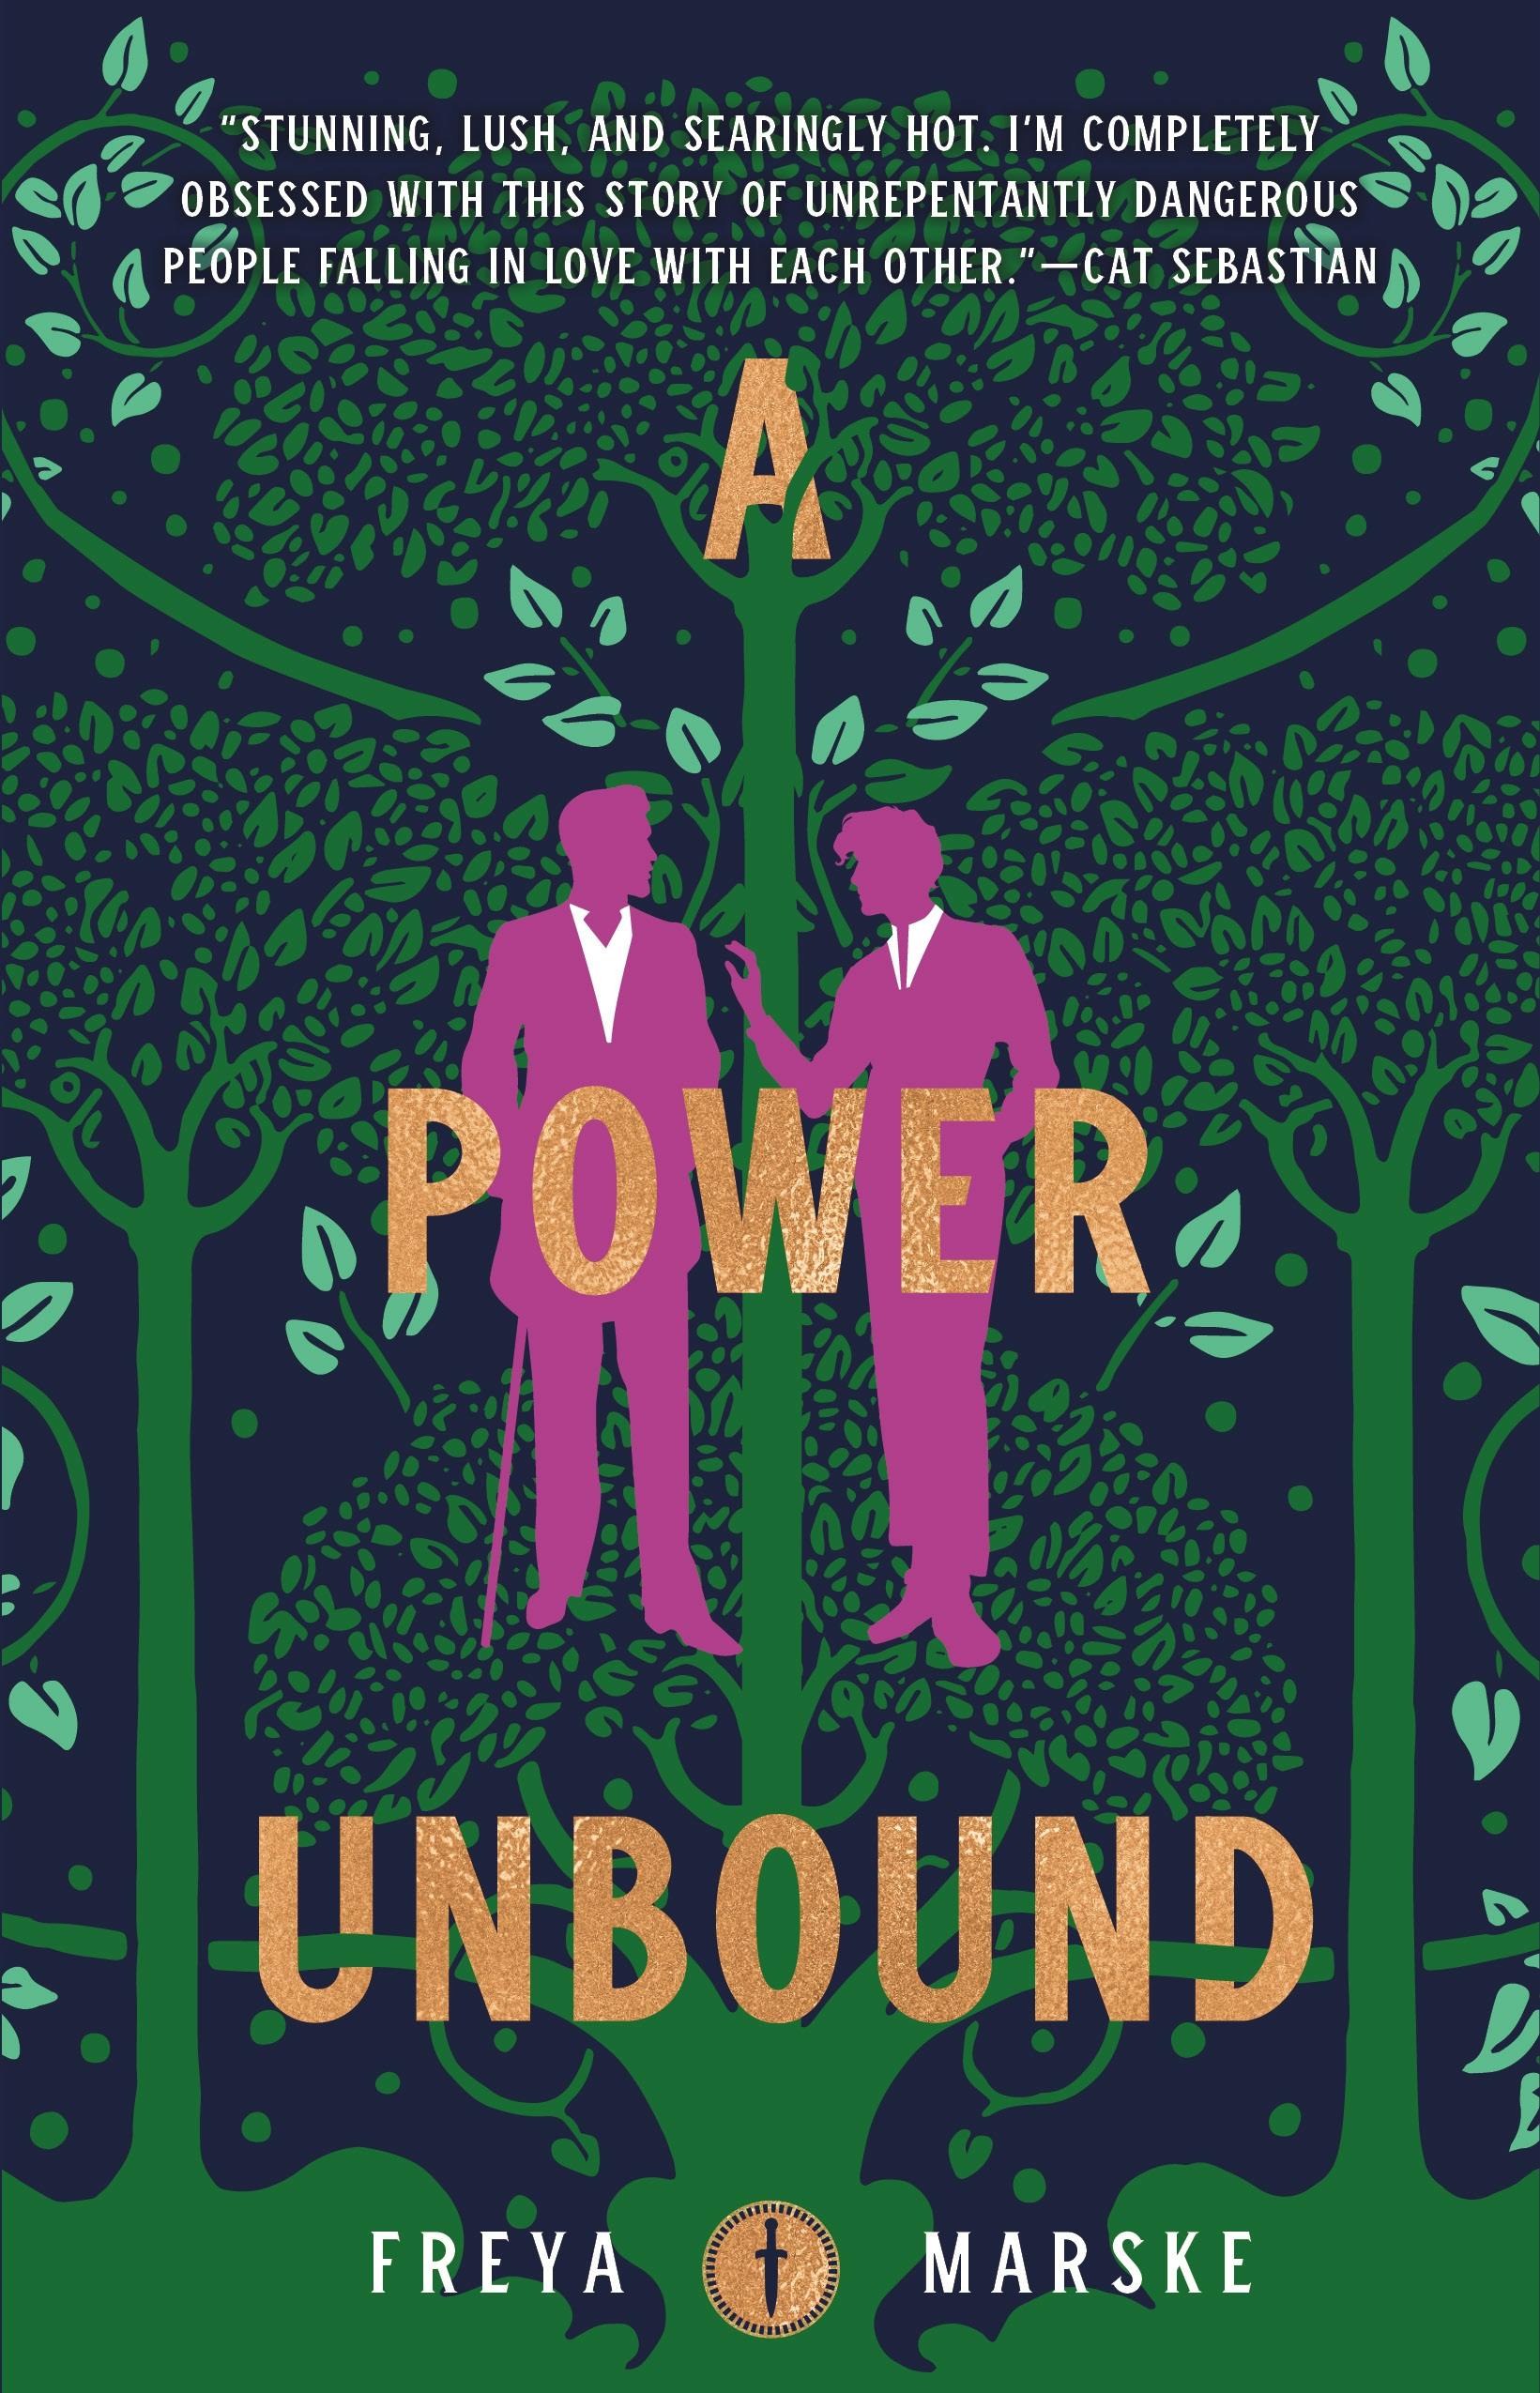 Cover for the book titled as: A Power Unbound